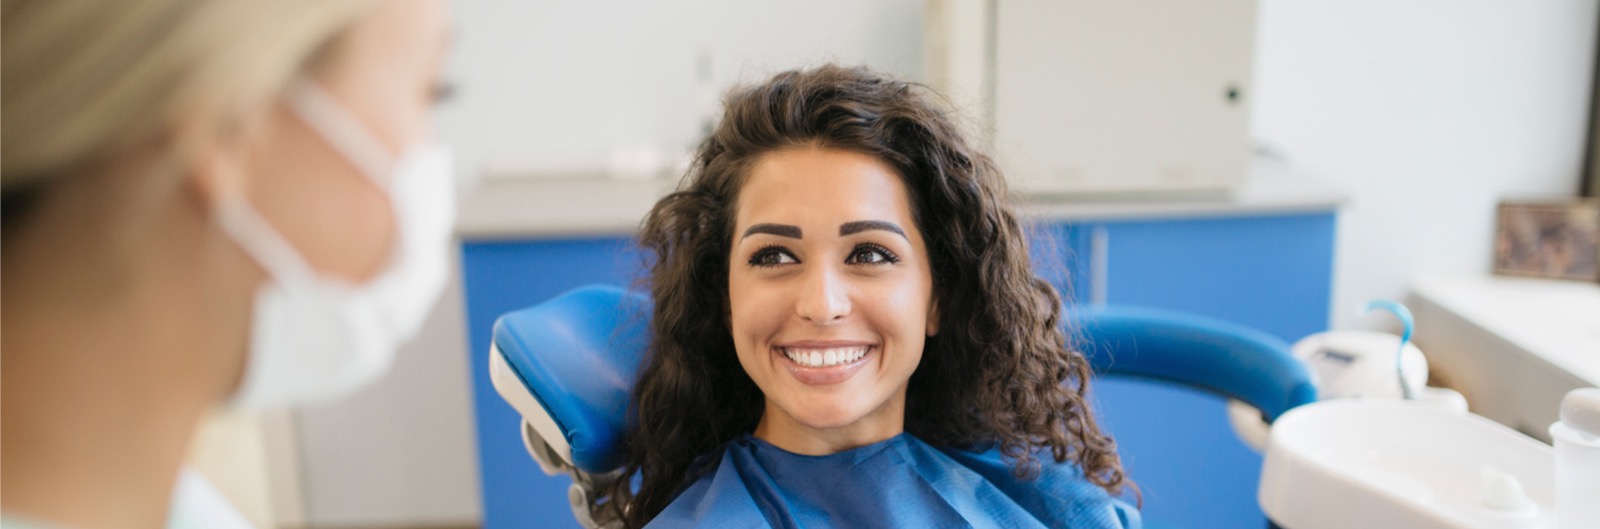 attractive-young-caucasian-woman-talking-to-her-dentist-picture-1600x529.jpg